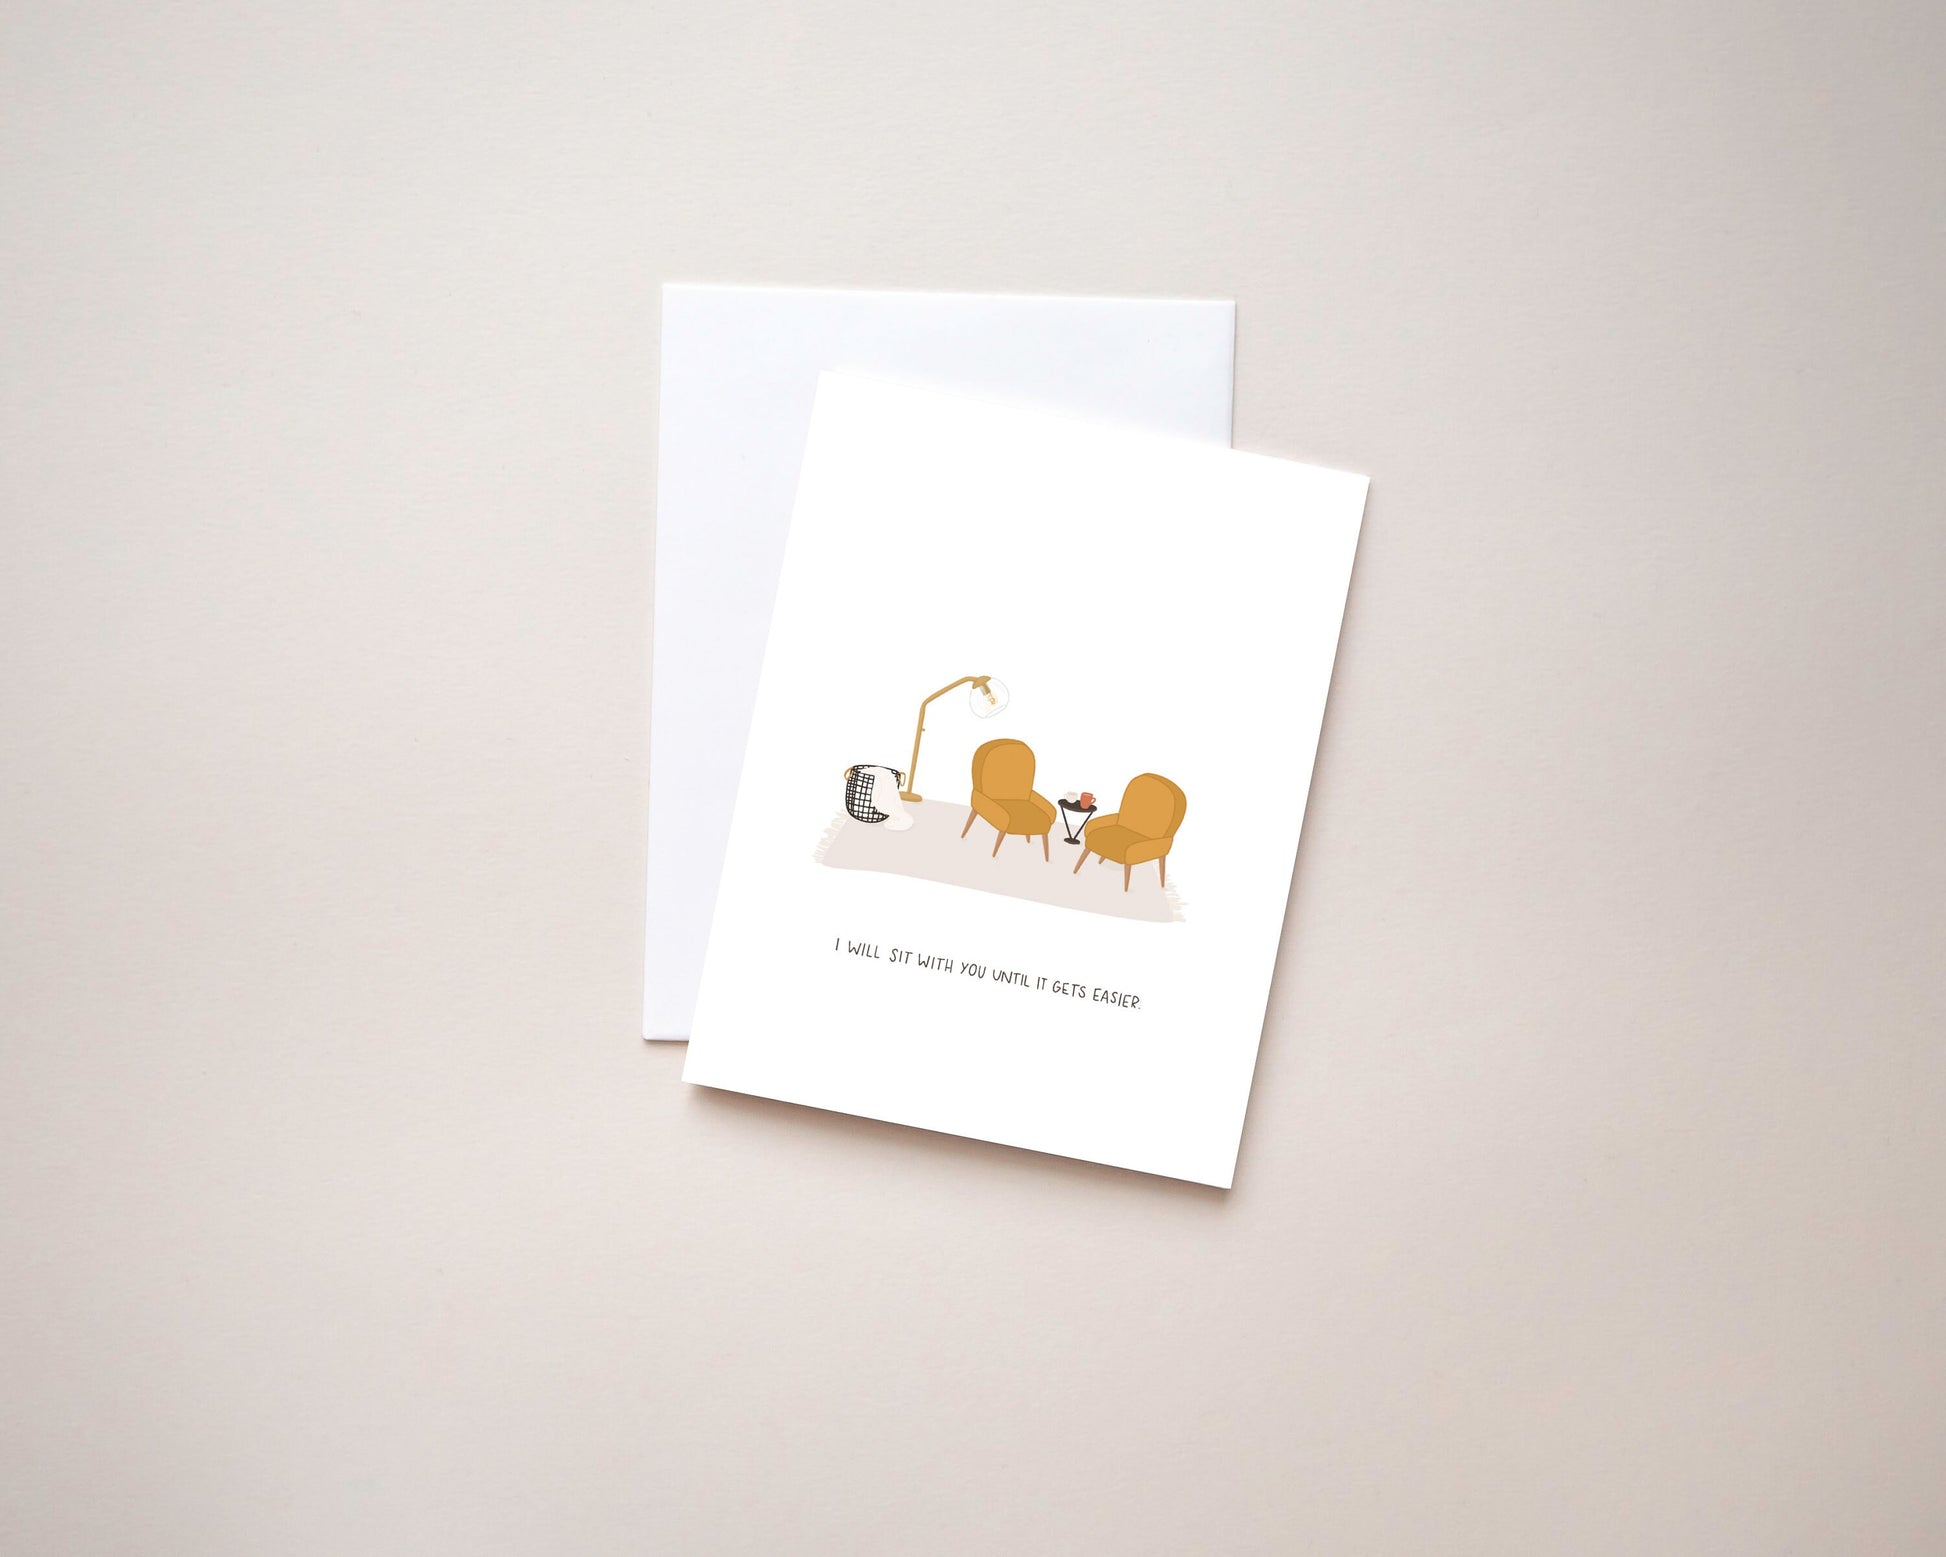 Friendship card | here for you card | handmade greeting card | 4.25x5.5 greeting card | feel better card | everything will be okay card